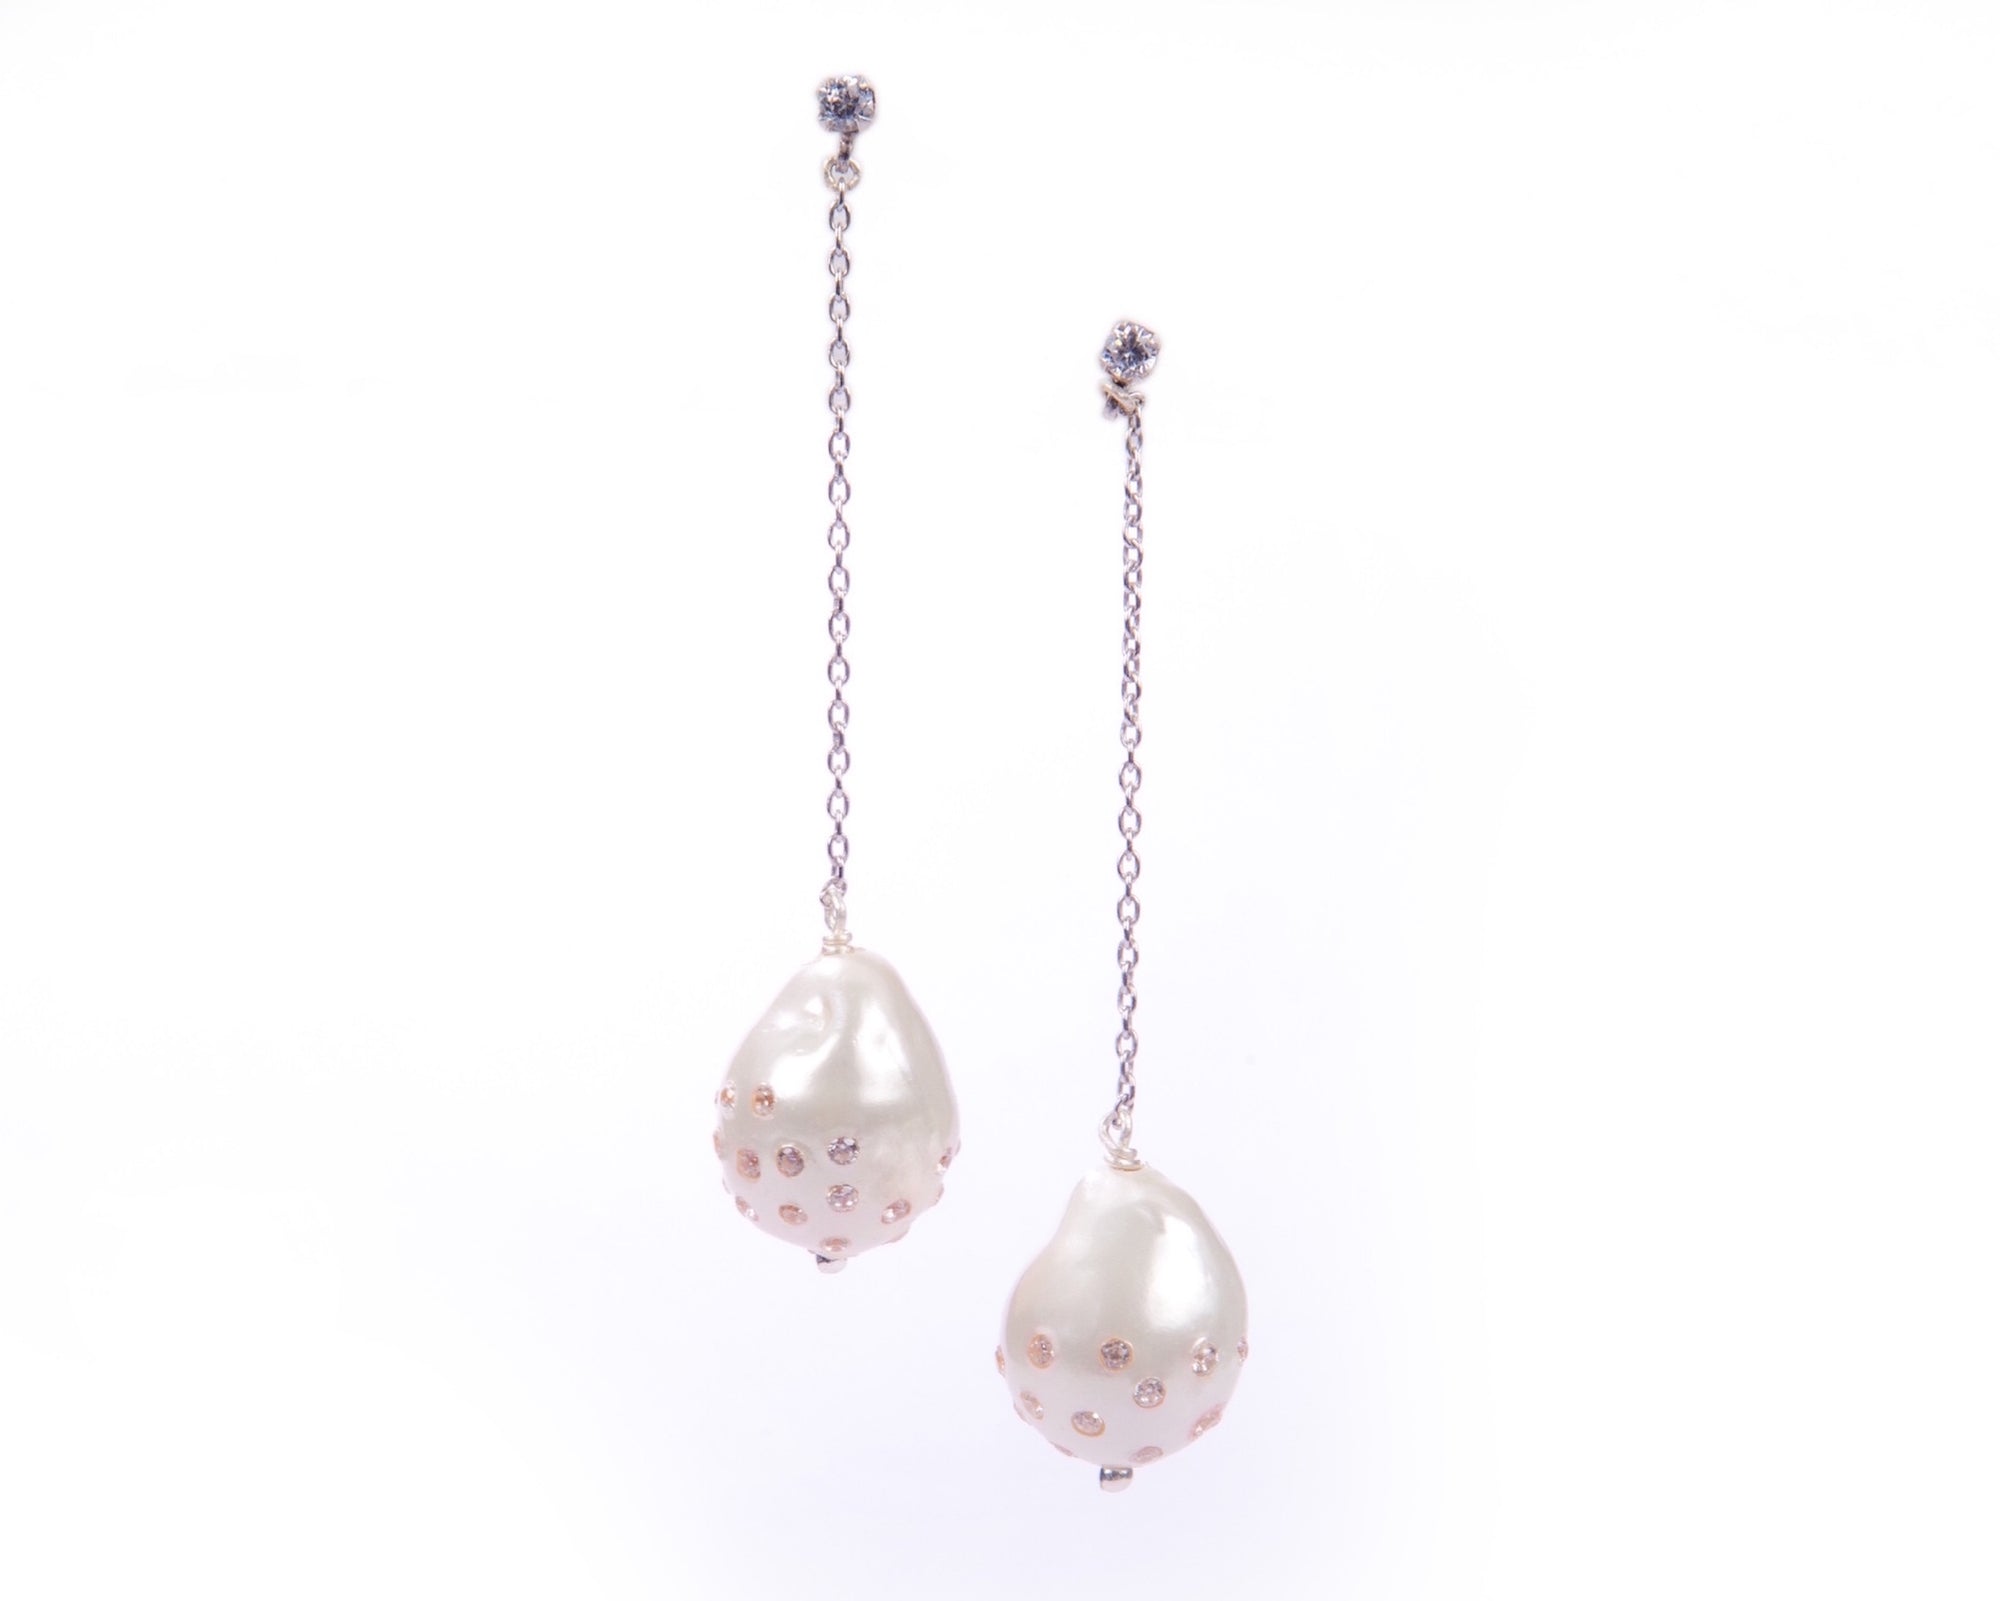 Studded baroque drops